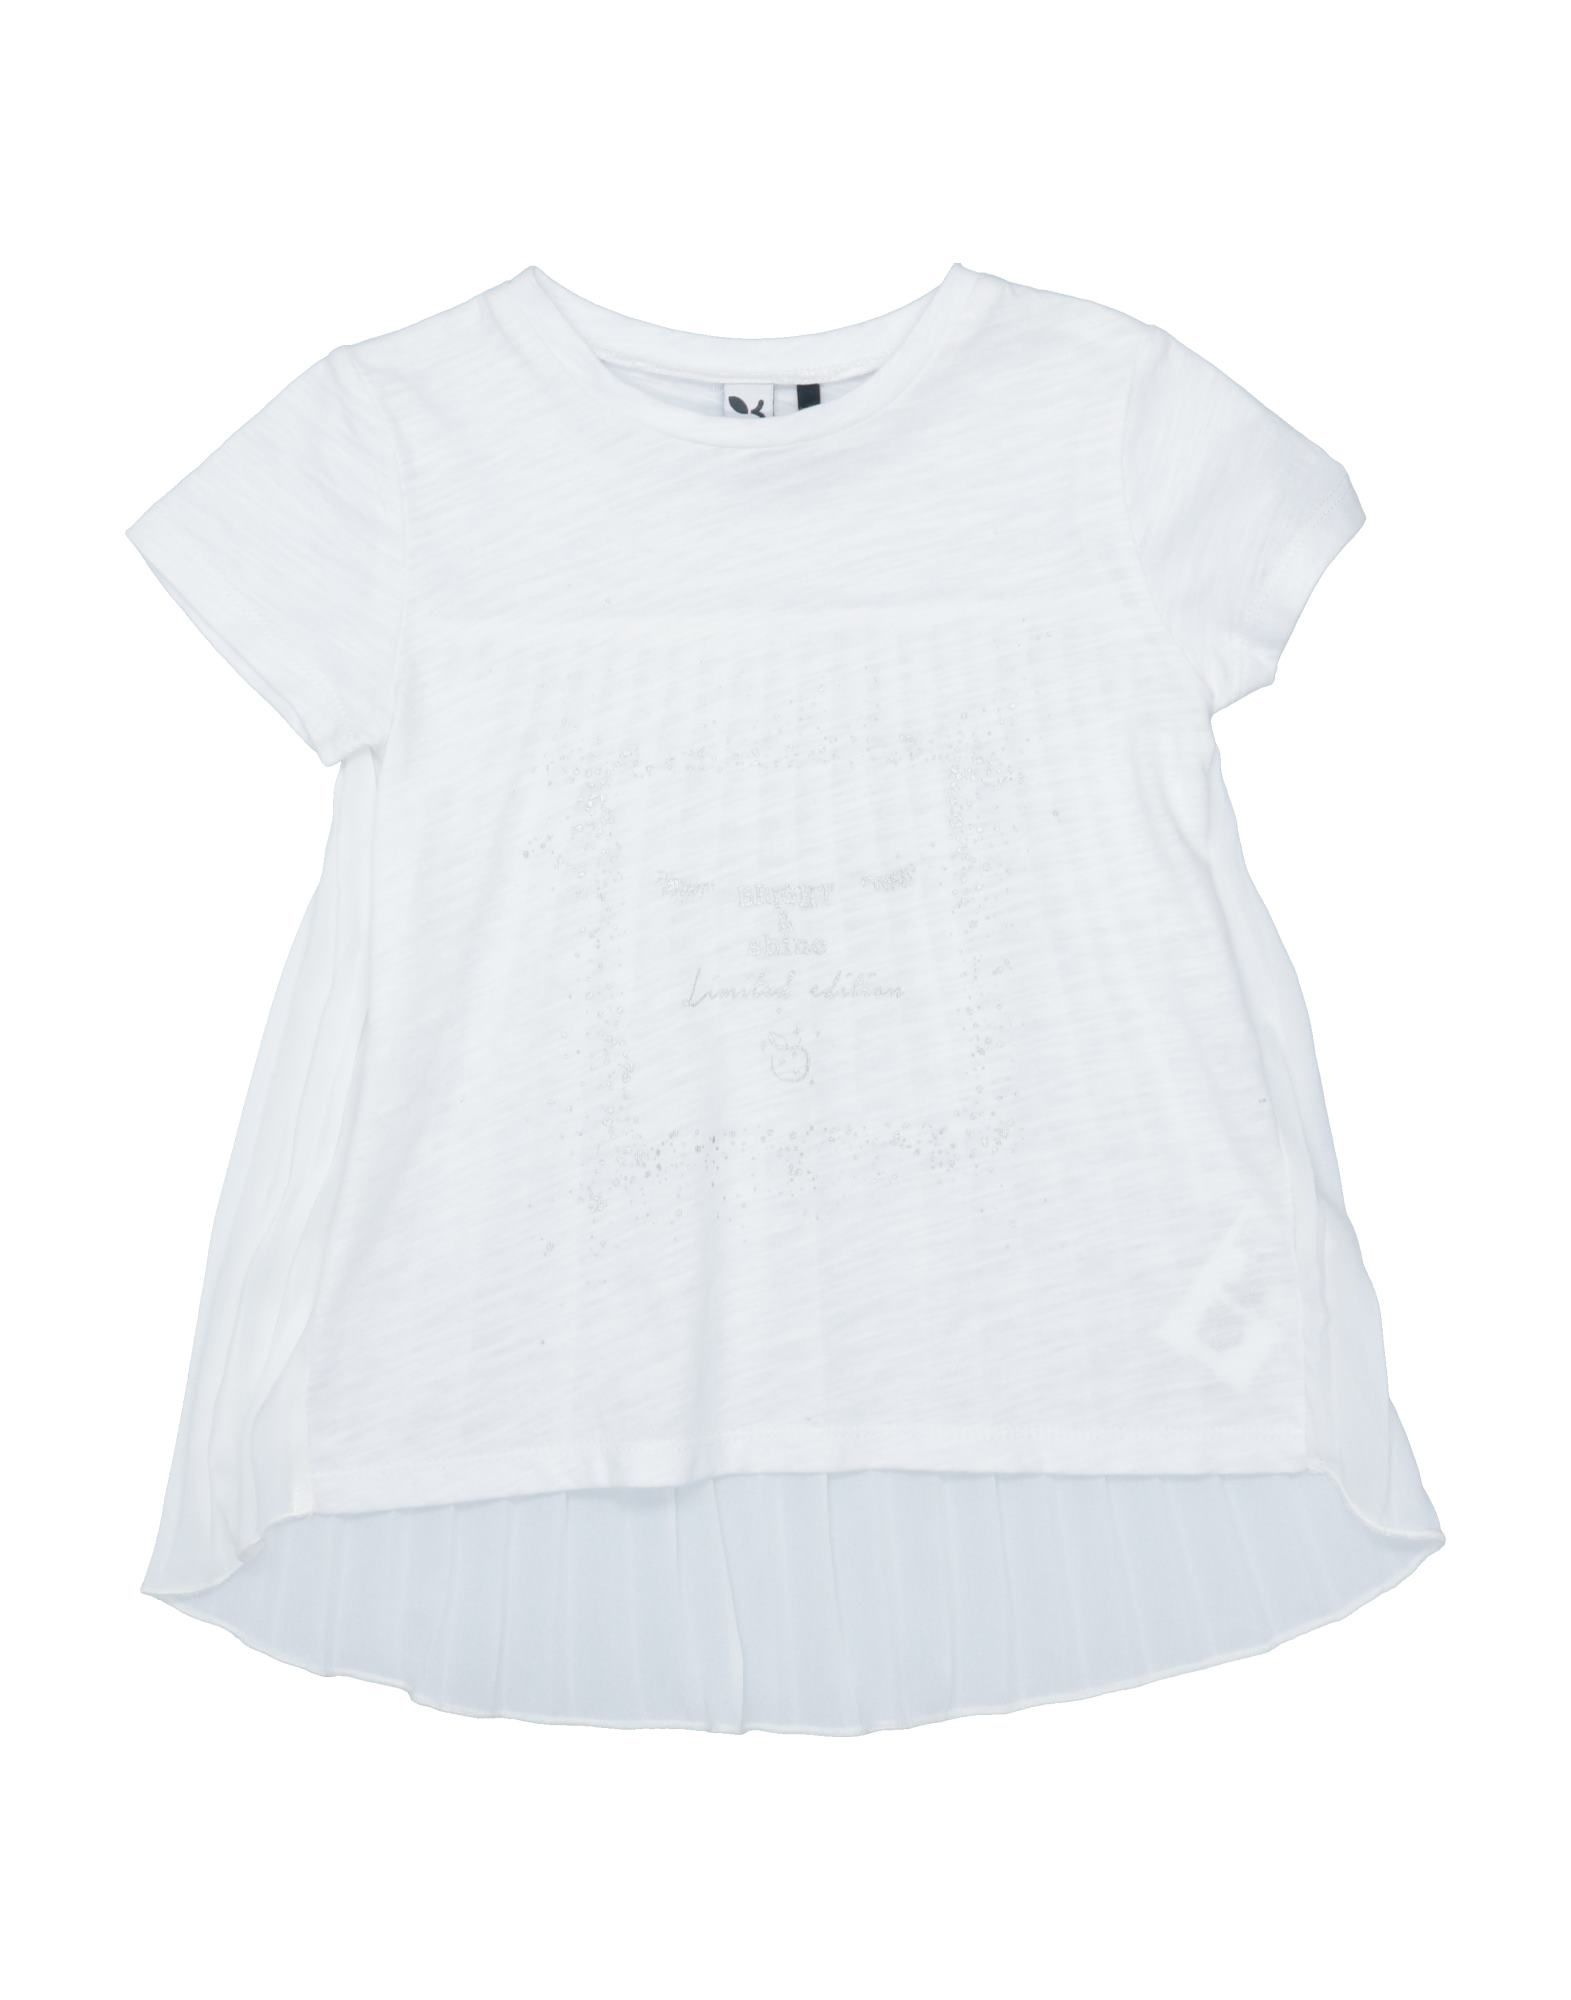 3 Pommes Kids' T-shirts In White